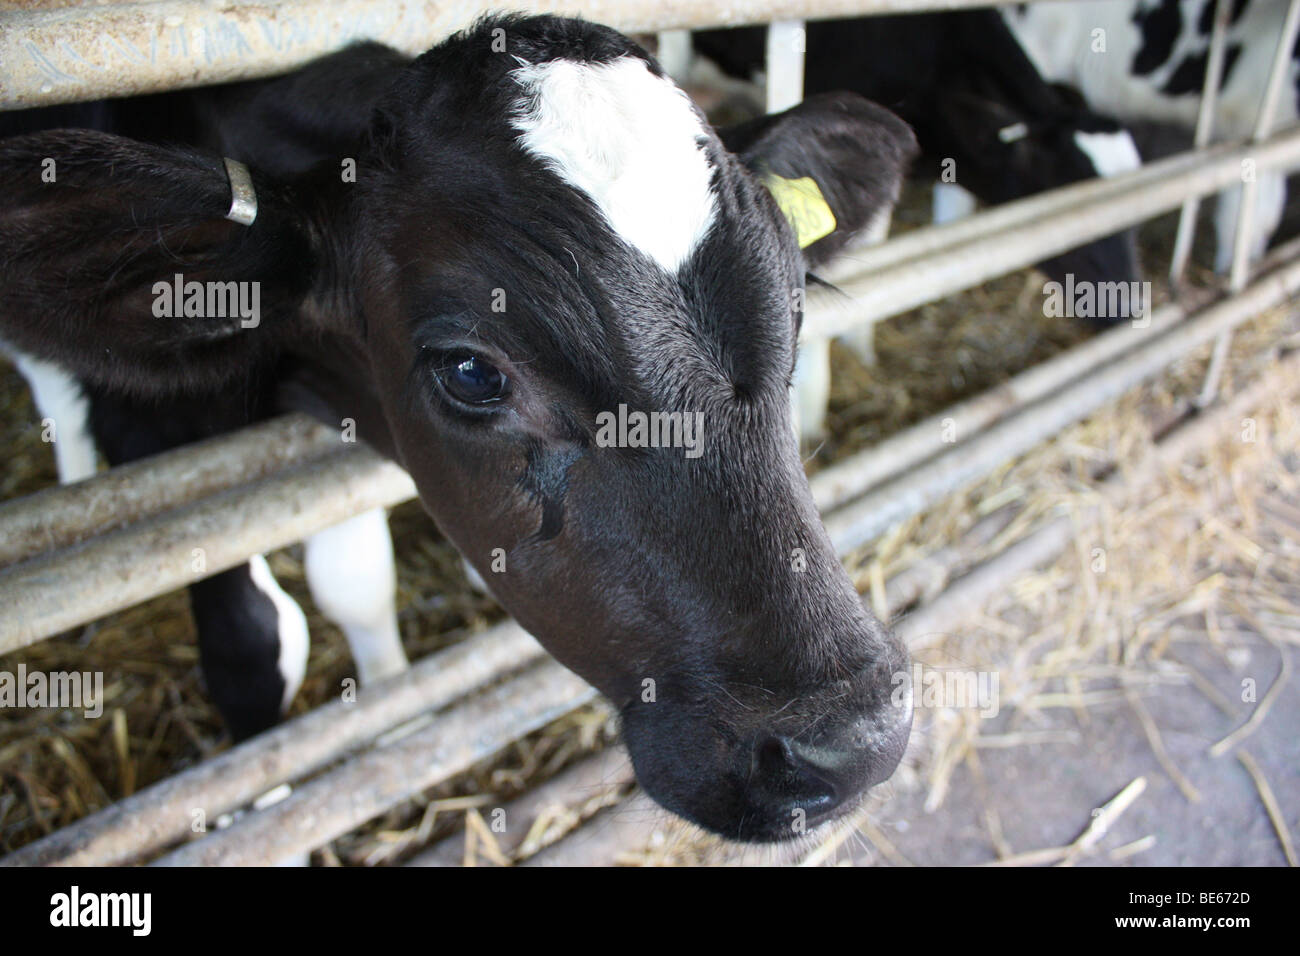 The black cow from stall Stock Photo